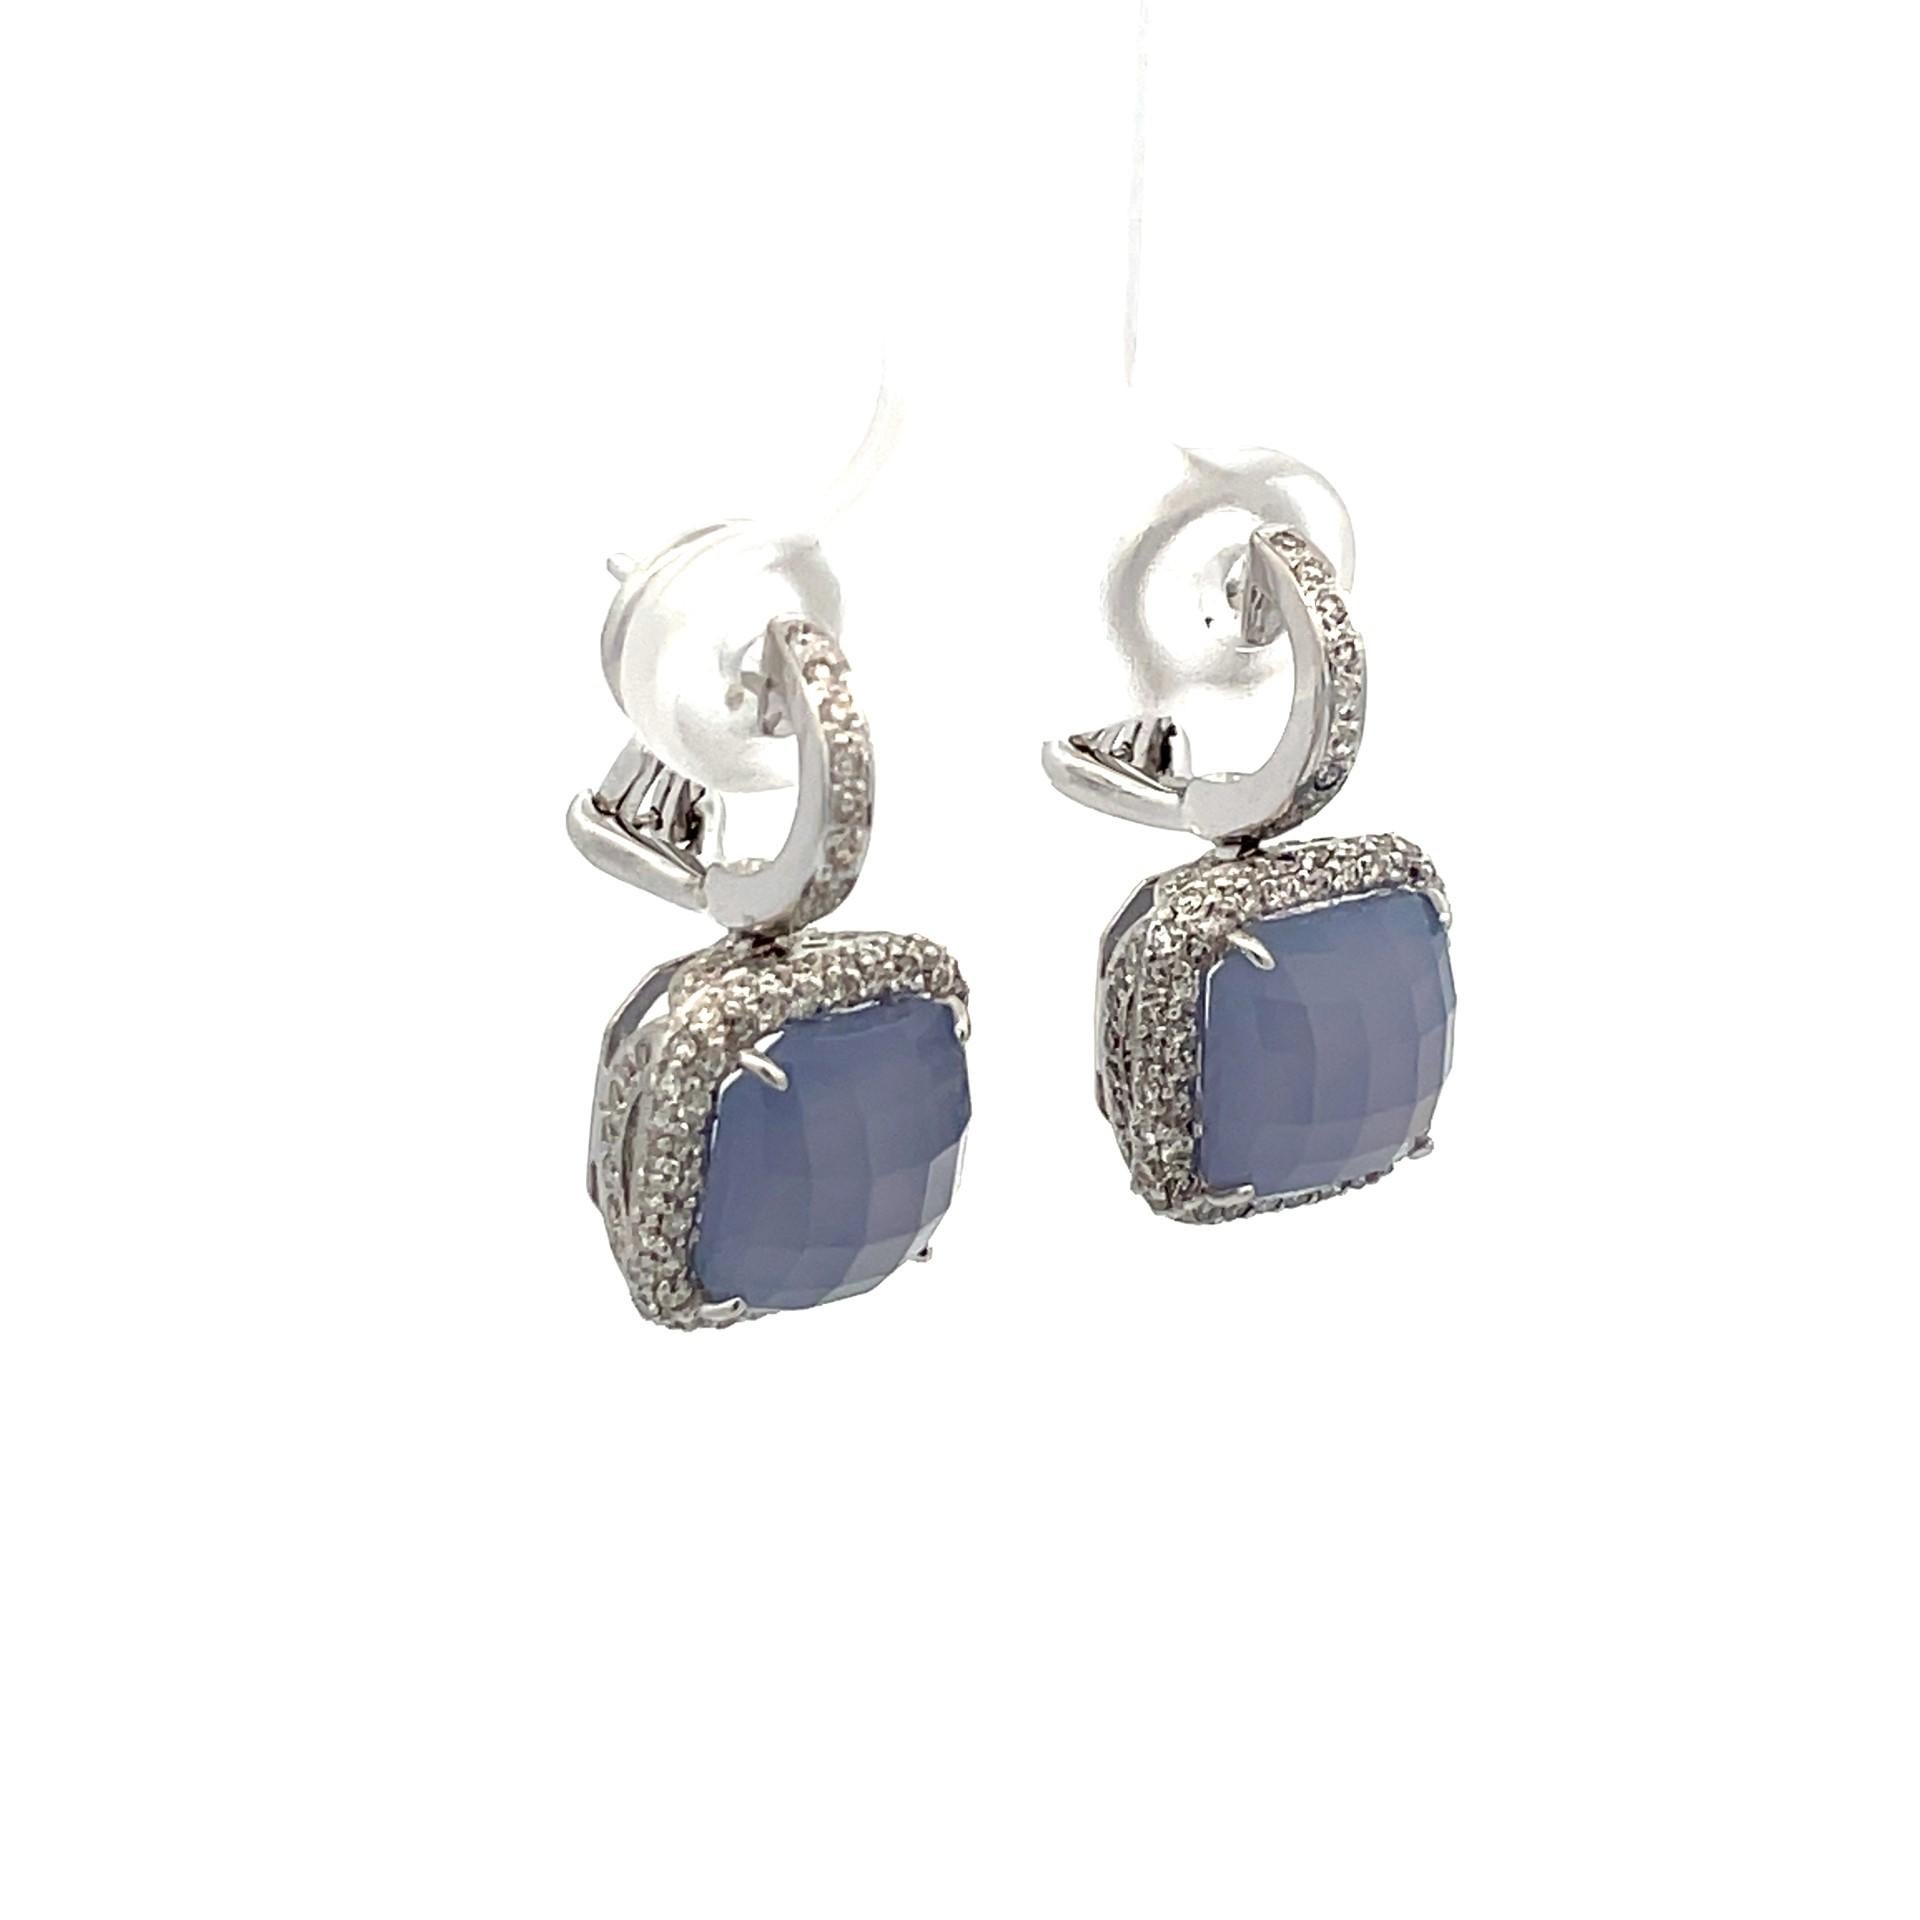 A pair of cushion shaped hanging earring set with natural blue checked top chalcedony and brilliant cut diamonds in 18kt white gold. 

2 natural blue chacedony 7.86ct total weight

192 brilliant cut diamonds 1.07ct total weight, quality G/VS

18kt